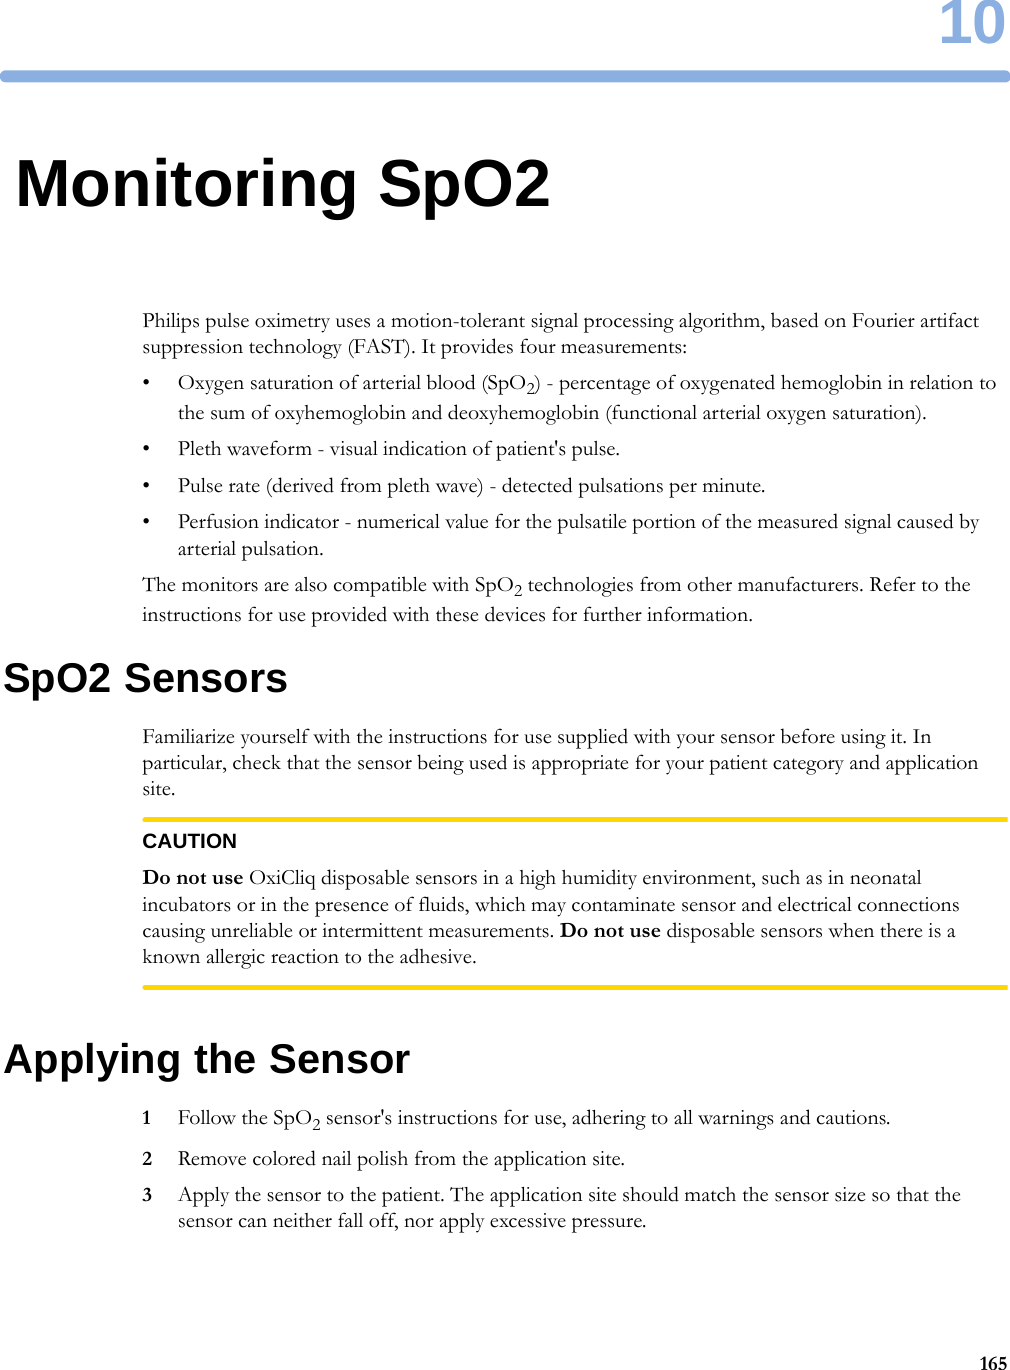 1016510Monitoring SpO2Philips pulse oximetry uses a motion-tolerant signal processing algorithm, based on Fourier artifact suppression technology (FAST). It provides four measurements:• Oxygen saturation of arterial blood (SpO2) - percentage of oxygenated hemoglobin in relation to the sum of oxyhemoglobin and deoxyhemoglobin (functional arterial oxygen saturation).• Pleth waveform - visual indication of patient&apos;s pulse.• Pulse rate (derived from pleth wave) - detected pulsations per minute.• Perfusion indicator - numerical value for the pulsatile portion of the measured signal caused by arterial pulsation.The monitors are also compatible with SpO2 technologies from other manufacturers. Refer to the instructions for use provided with these devices for further information.SpO2 SensorsFamiliarize yourself with the instructions for use supplied with your sensor before using it. In particular, check that the sensor being used is appropriate for your patient category and application site.CAUTIONDo not use OxiCliq disposable sensors in a high humidity environment, such as in neonatal incubators or in the presence of fluids, which may contaminate sensor and electrical connections causing unreliable or intermittent measurements. Do not use disposable sensors when there is a known allergic reaction to the adhesive.Applying the Sensor1Follow the SpO2 sensor&apos;s instructions for use, adhering to all warnings and cautions.2Remove colored nail polish from the application site.3Apply the sensor to the patient. The application site should match the sensor size so that the sensor can neither fall off, nor apply excessive pressure.